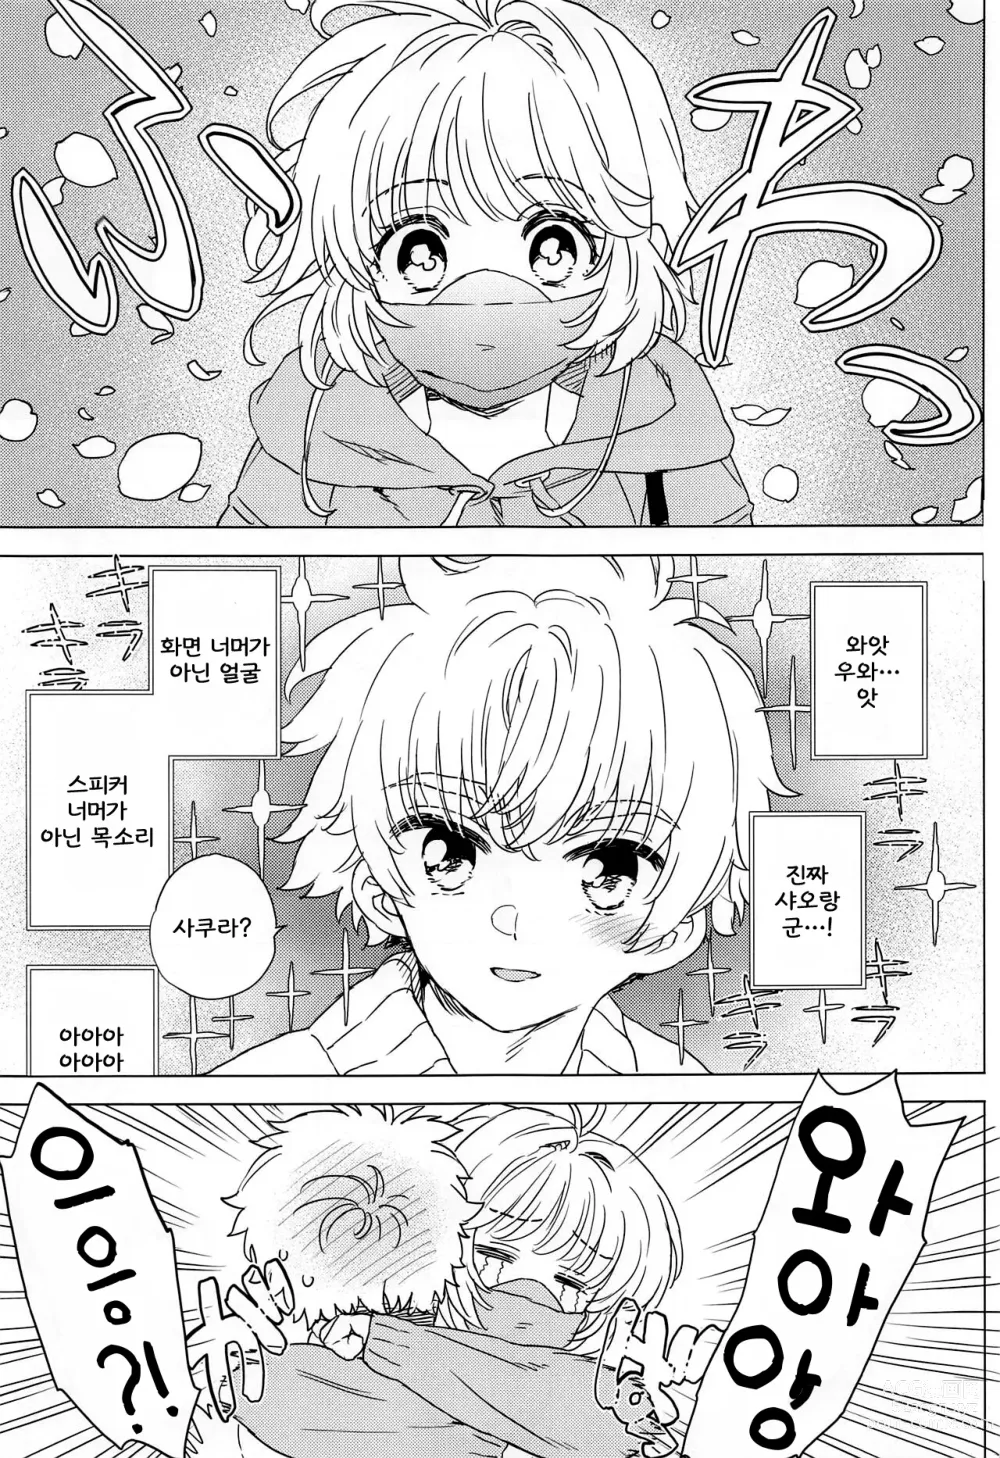 Page 6 of doujinshi 사쿠라와 샤오랑의 집 데이트